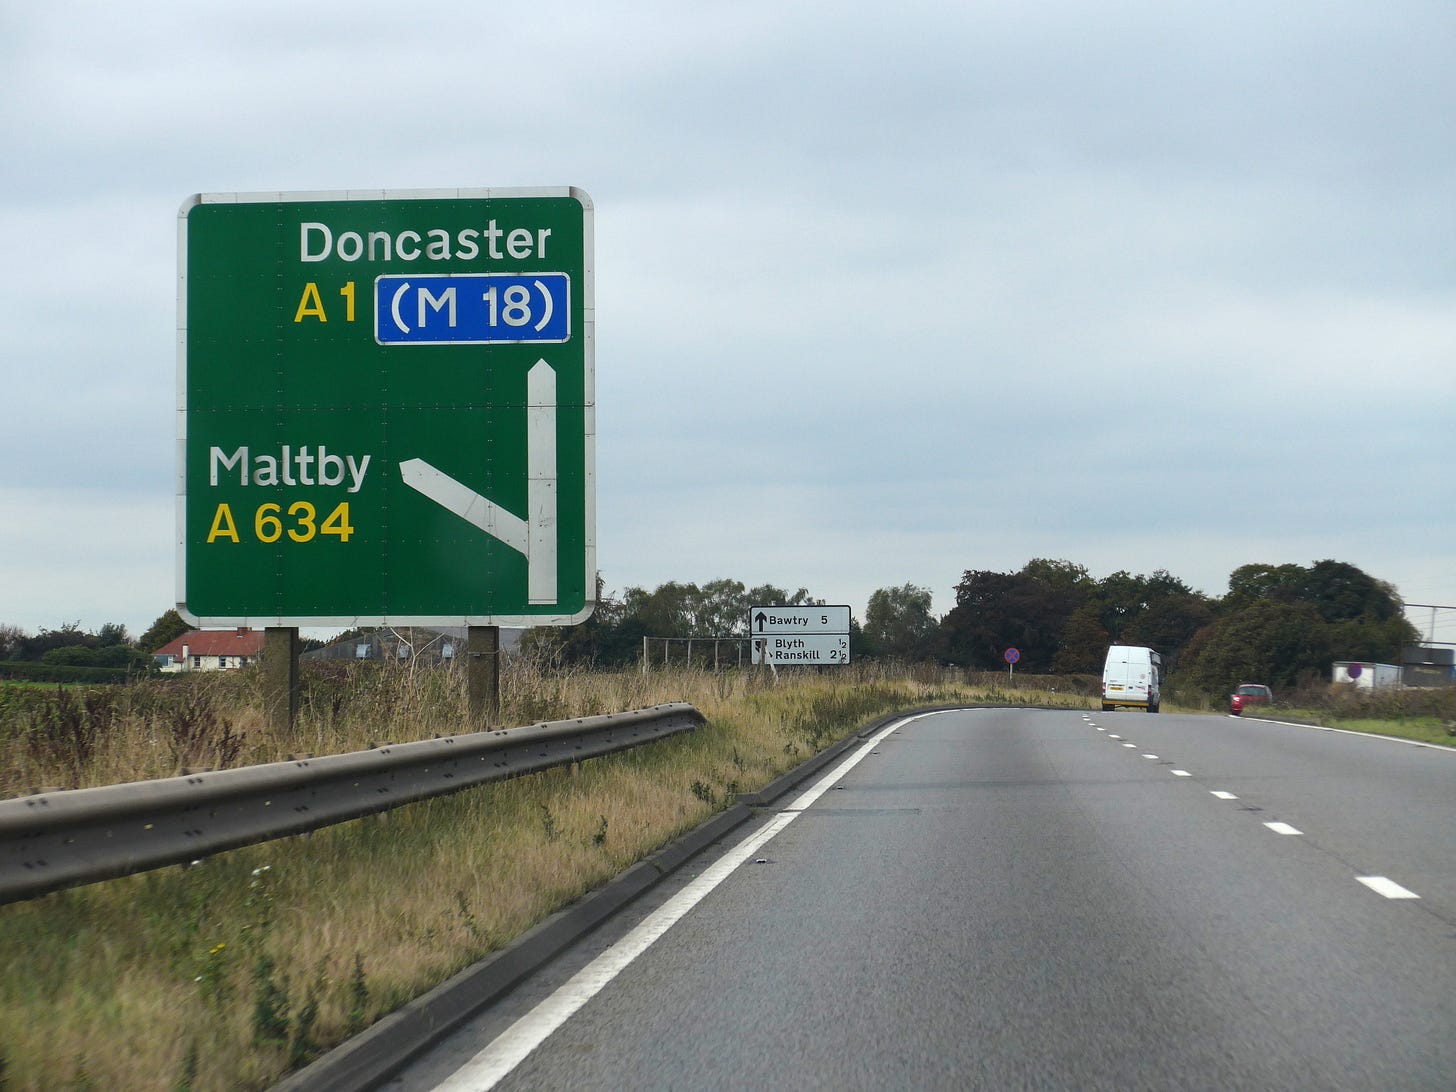 https://upload.wikimedia.org/wikipedia/commons/8/8d/2014_A1_road_sign_Maltby.jpg